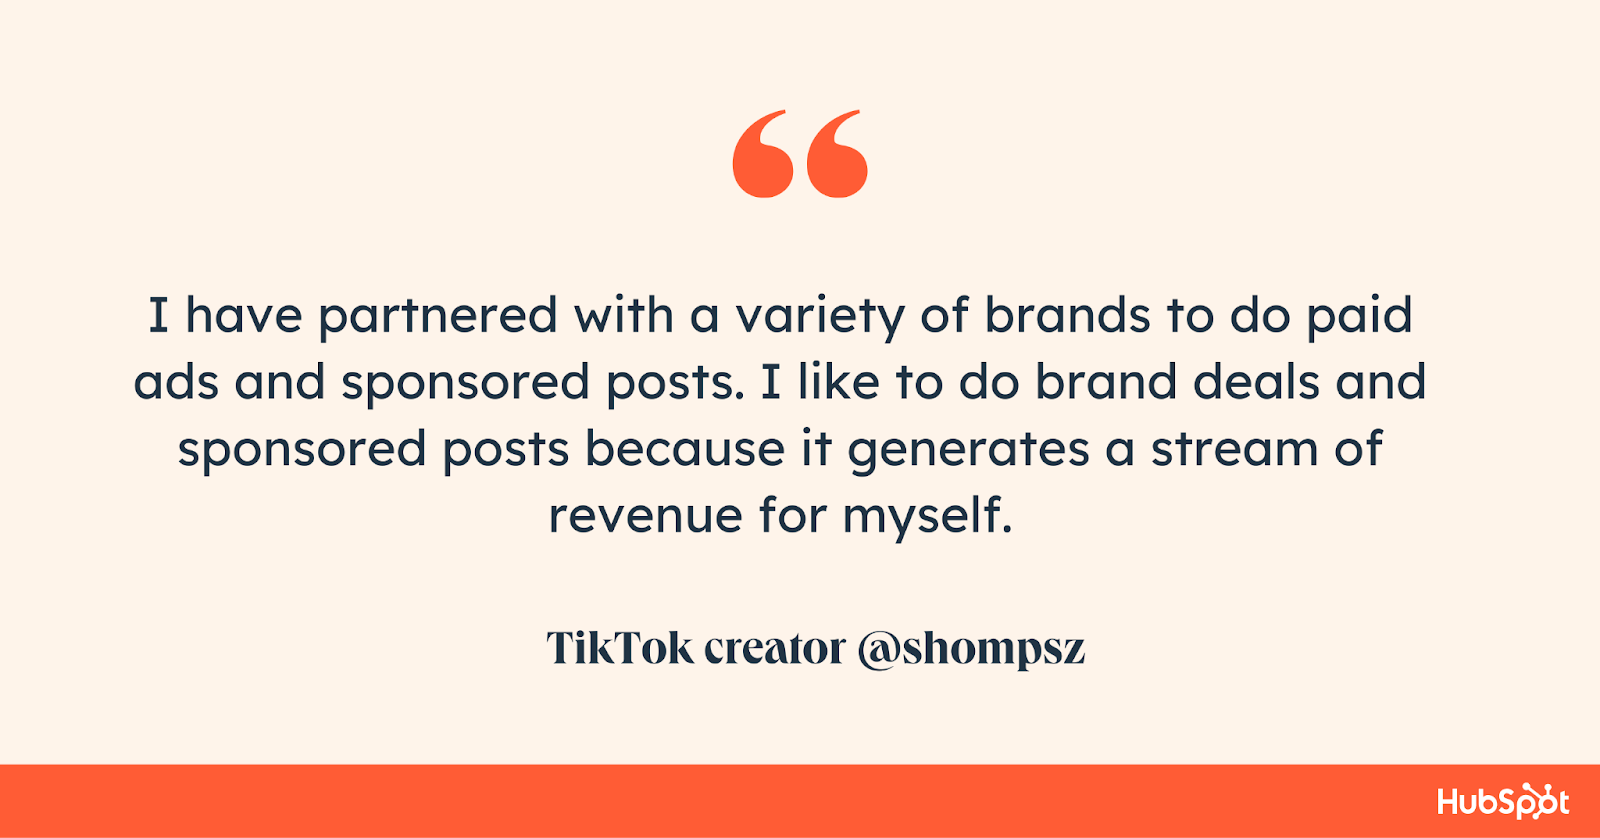 quote from tiktok creator on brand deals and sponsored posts